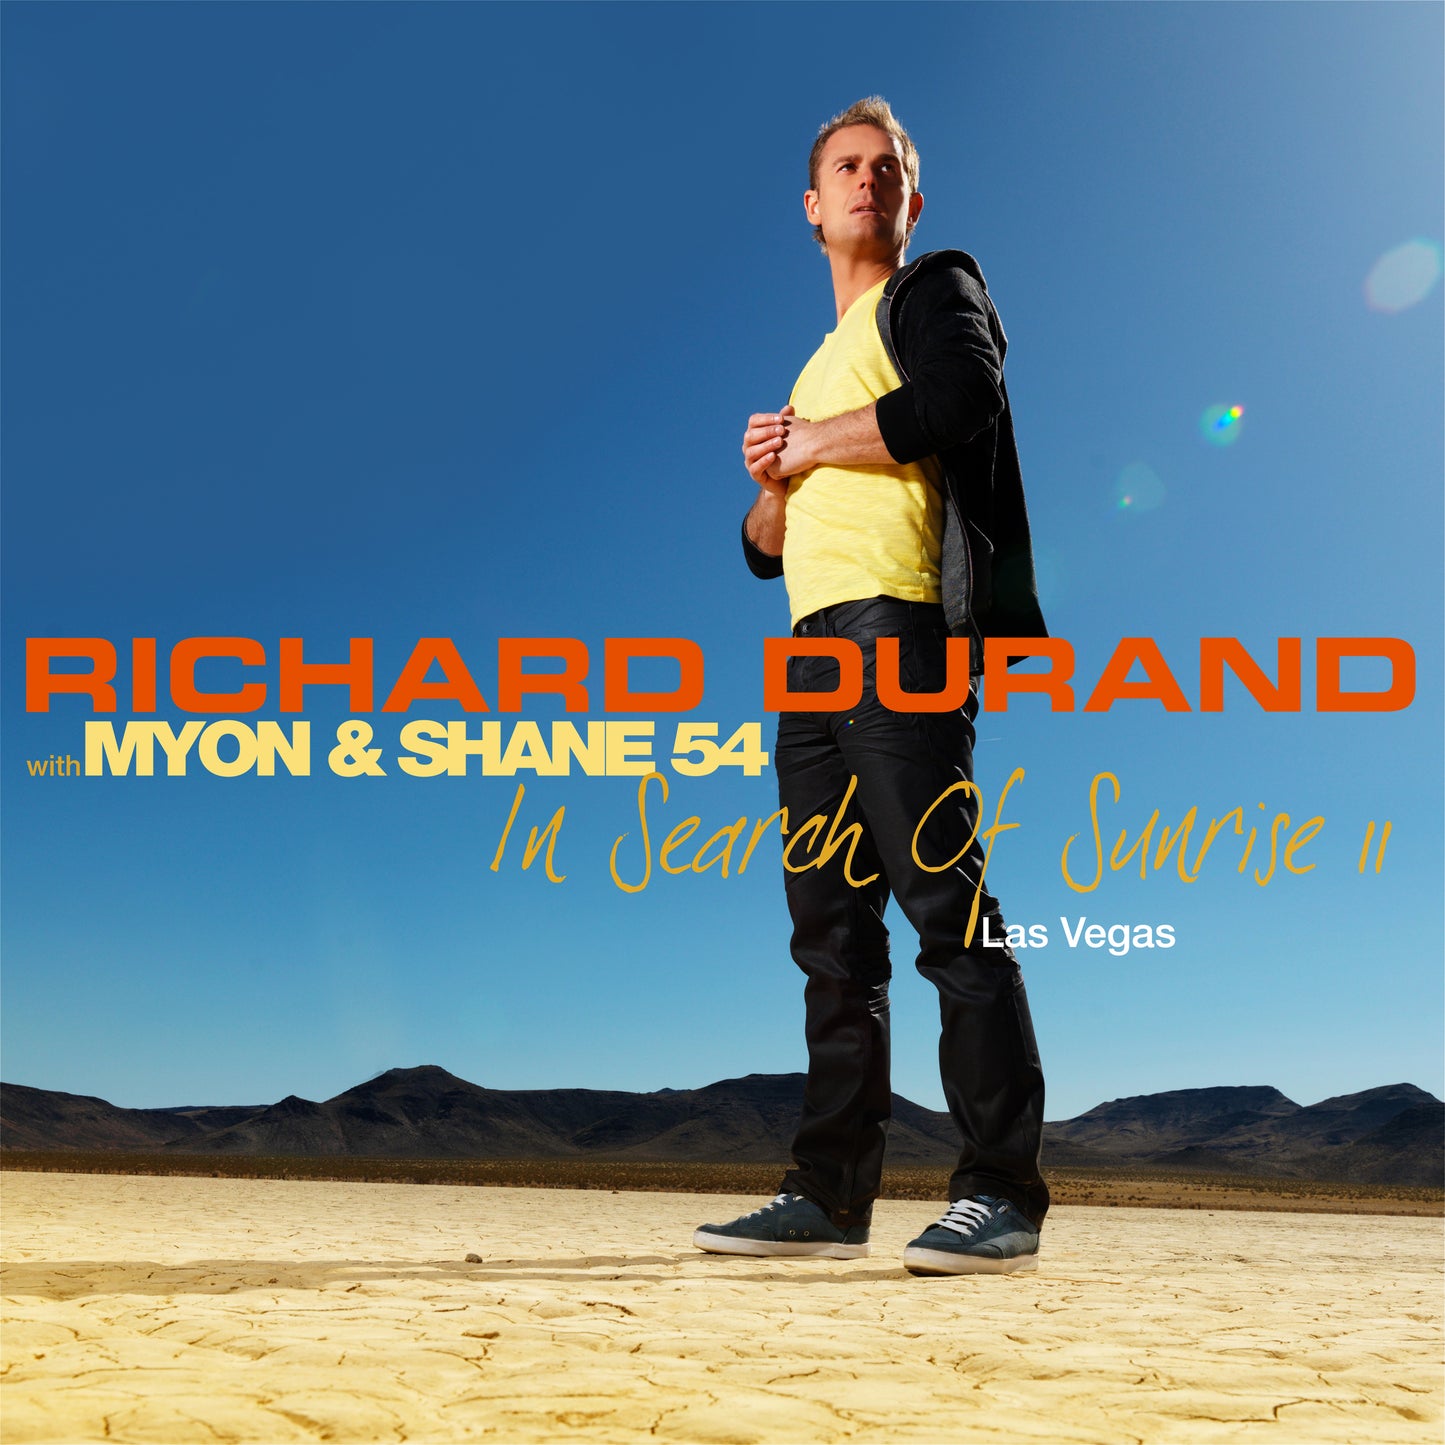 Richard Durand - In Search Of Sunrise 11